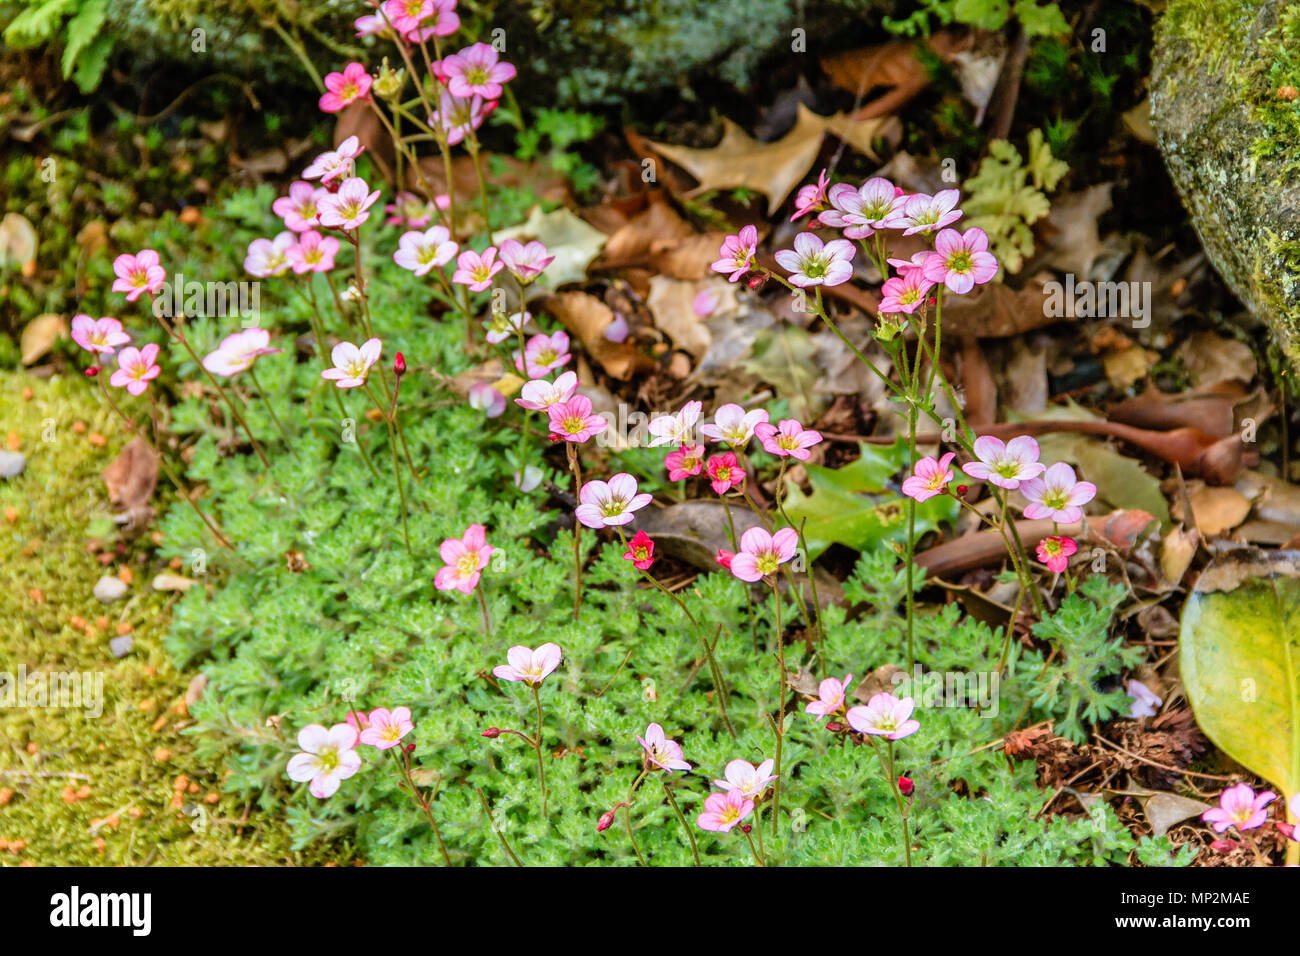 Saxifraga saxifrage alpine rockery plant with small pink flowers, growing in Northumberland, UK. May 2018. Stock Photo